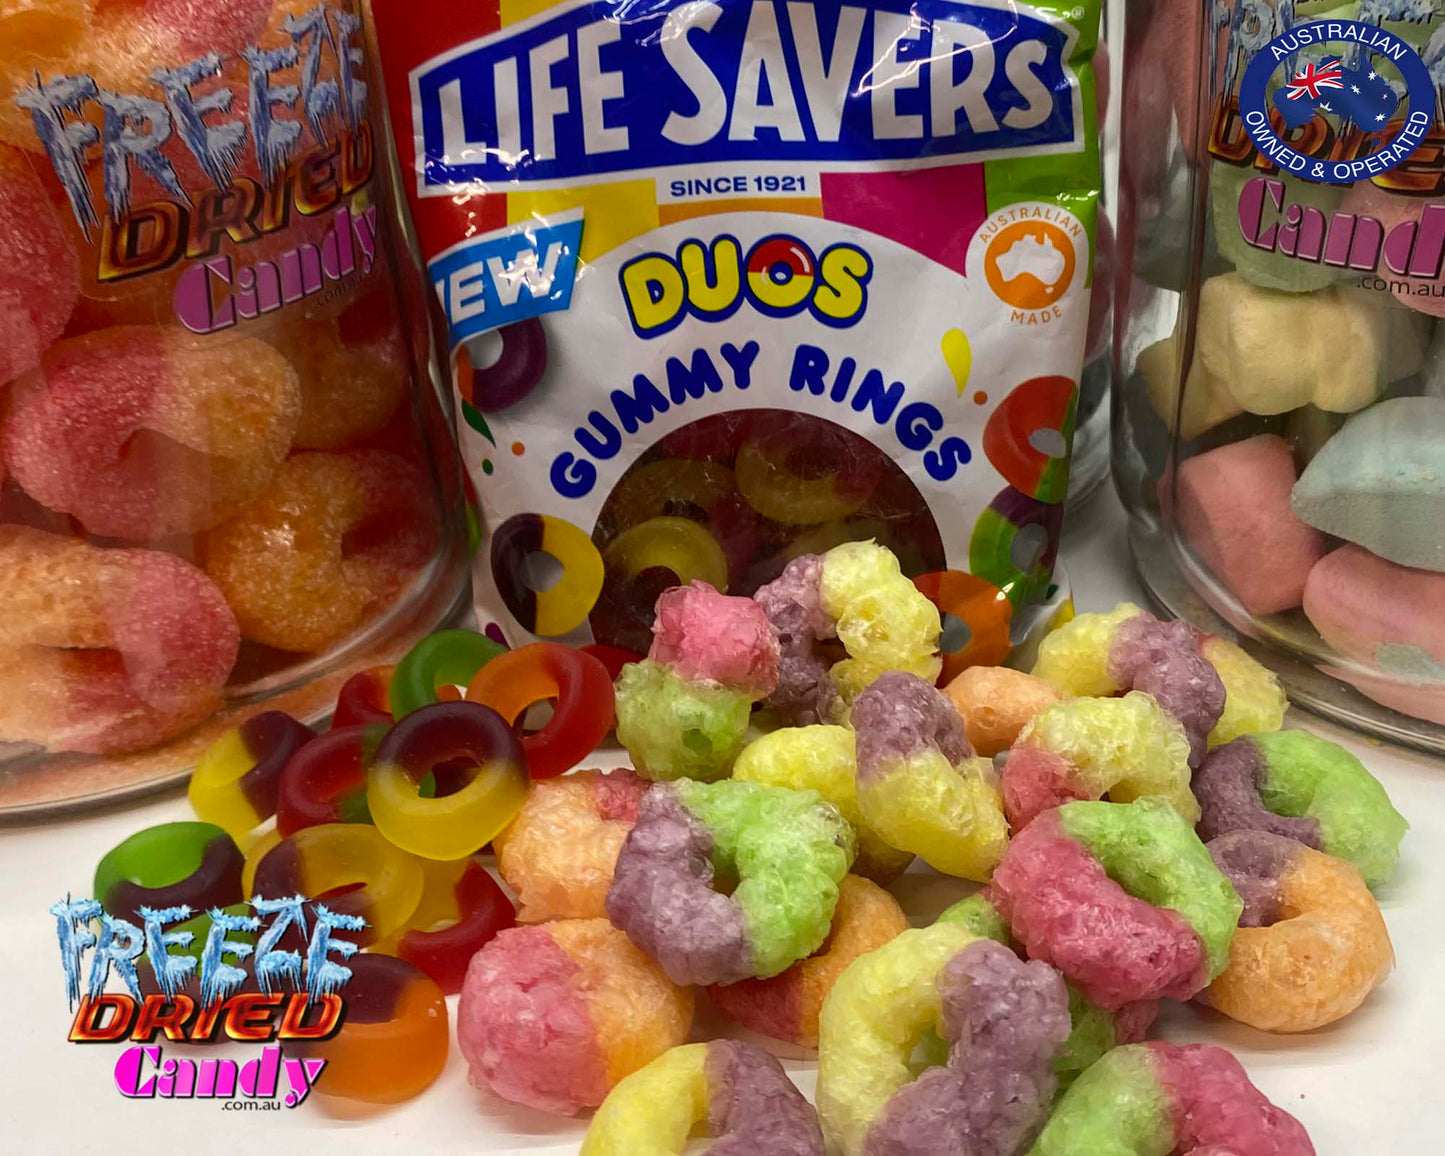 Buy online Freeze Dried Life Saver Gummi Duos - Freeze Dried Candy Lollies Awaken your taste buds and savour twice the flavour with our Freeze Dried Life Savers® Duos Rings. The delicious double flavour duos of raspberry, pineapple, blackcurrant, orange, and watermelon collide for more mouth-watering fun. Enjoy each flavour on its own, or combine together to make a whole new flavour!